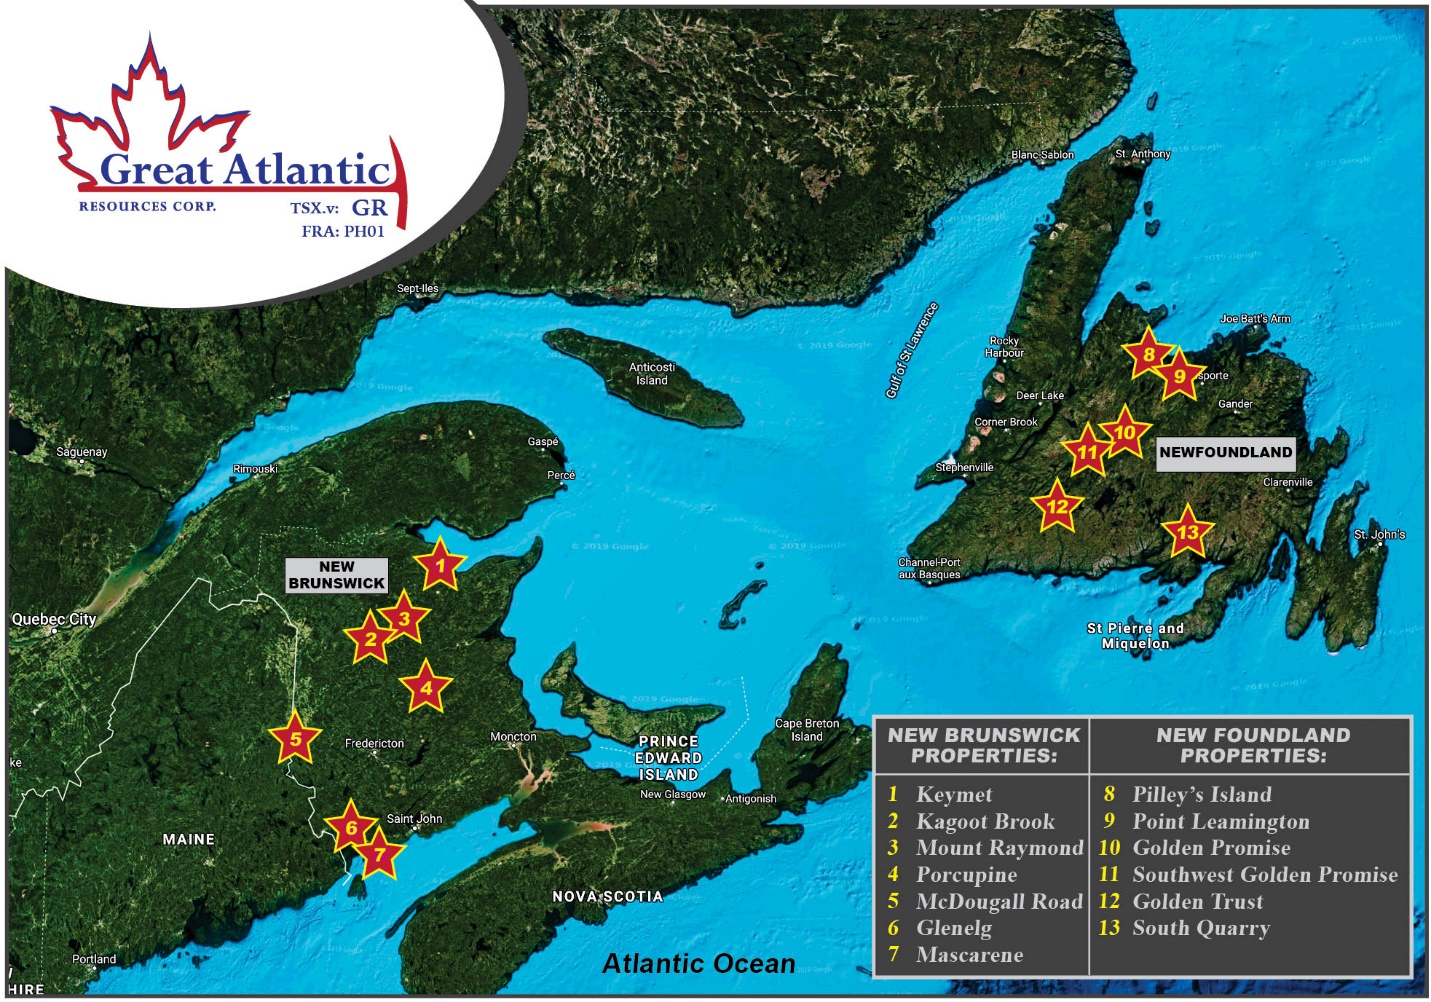 Great Atlantic Resources Corp., Thursday, September 9, 2021, Press release picture